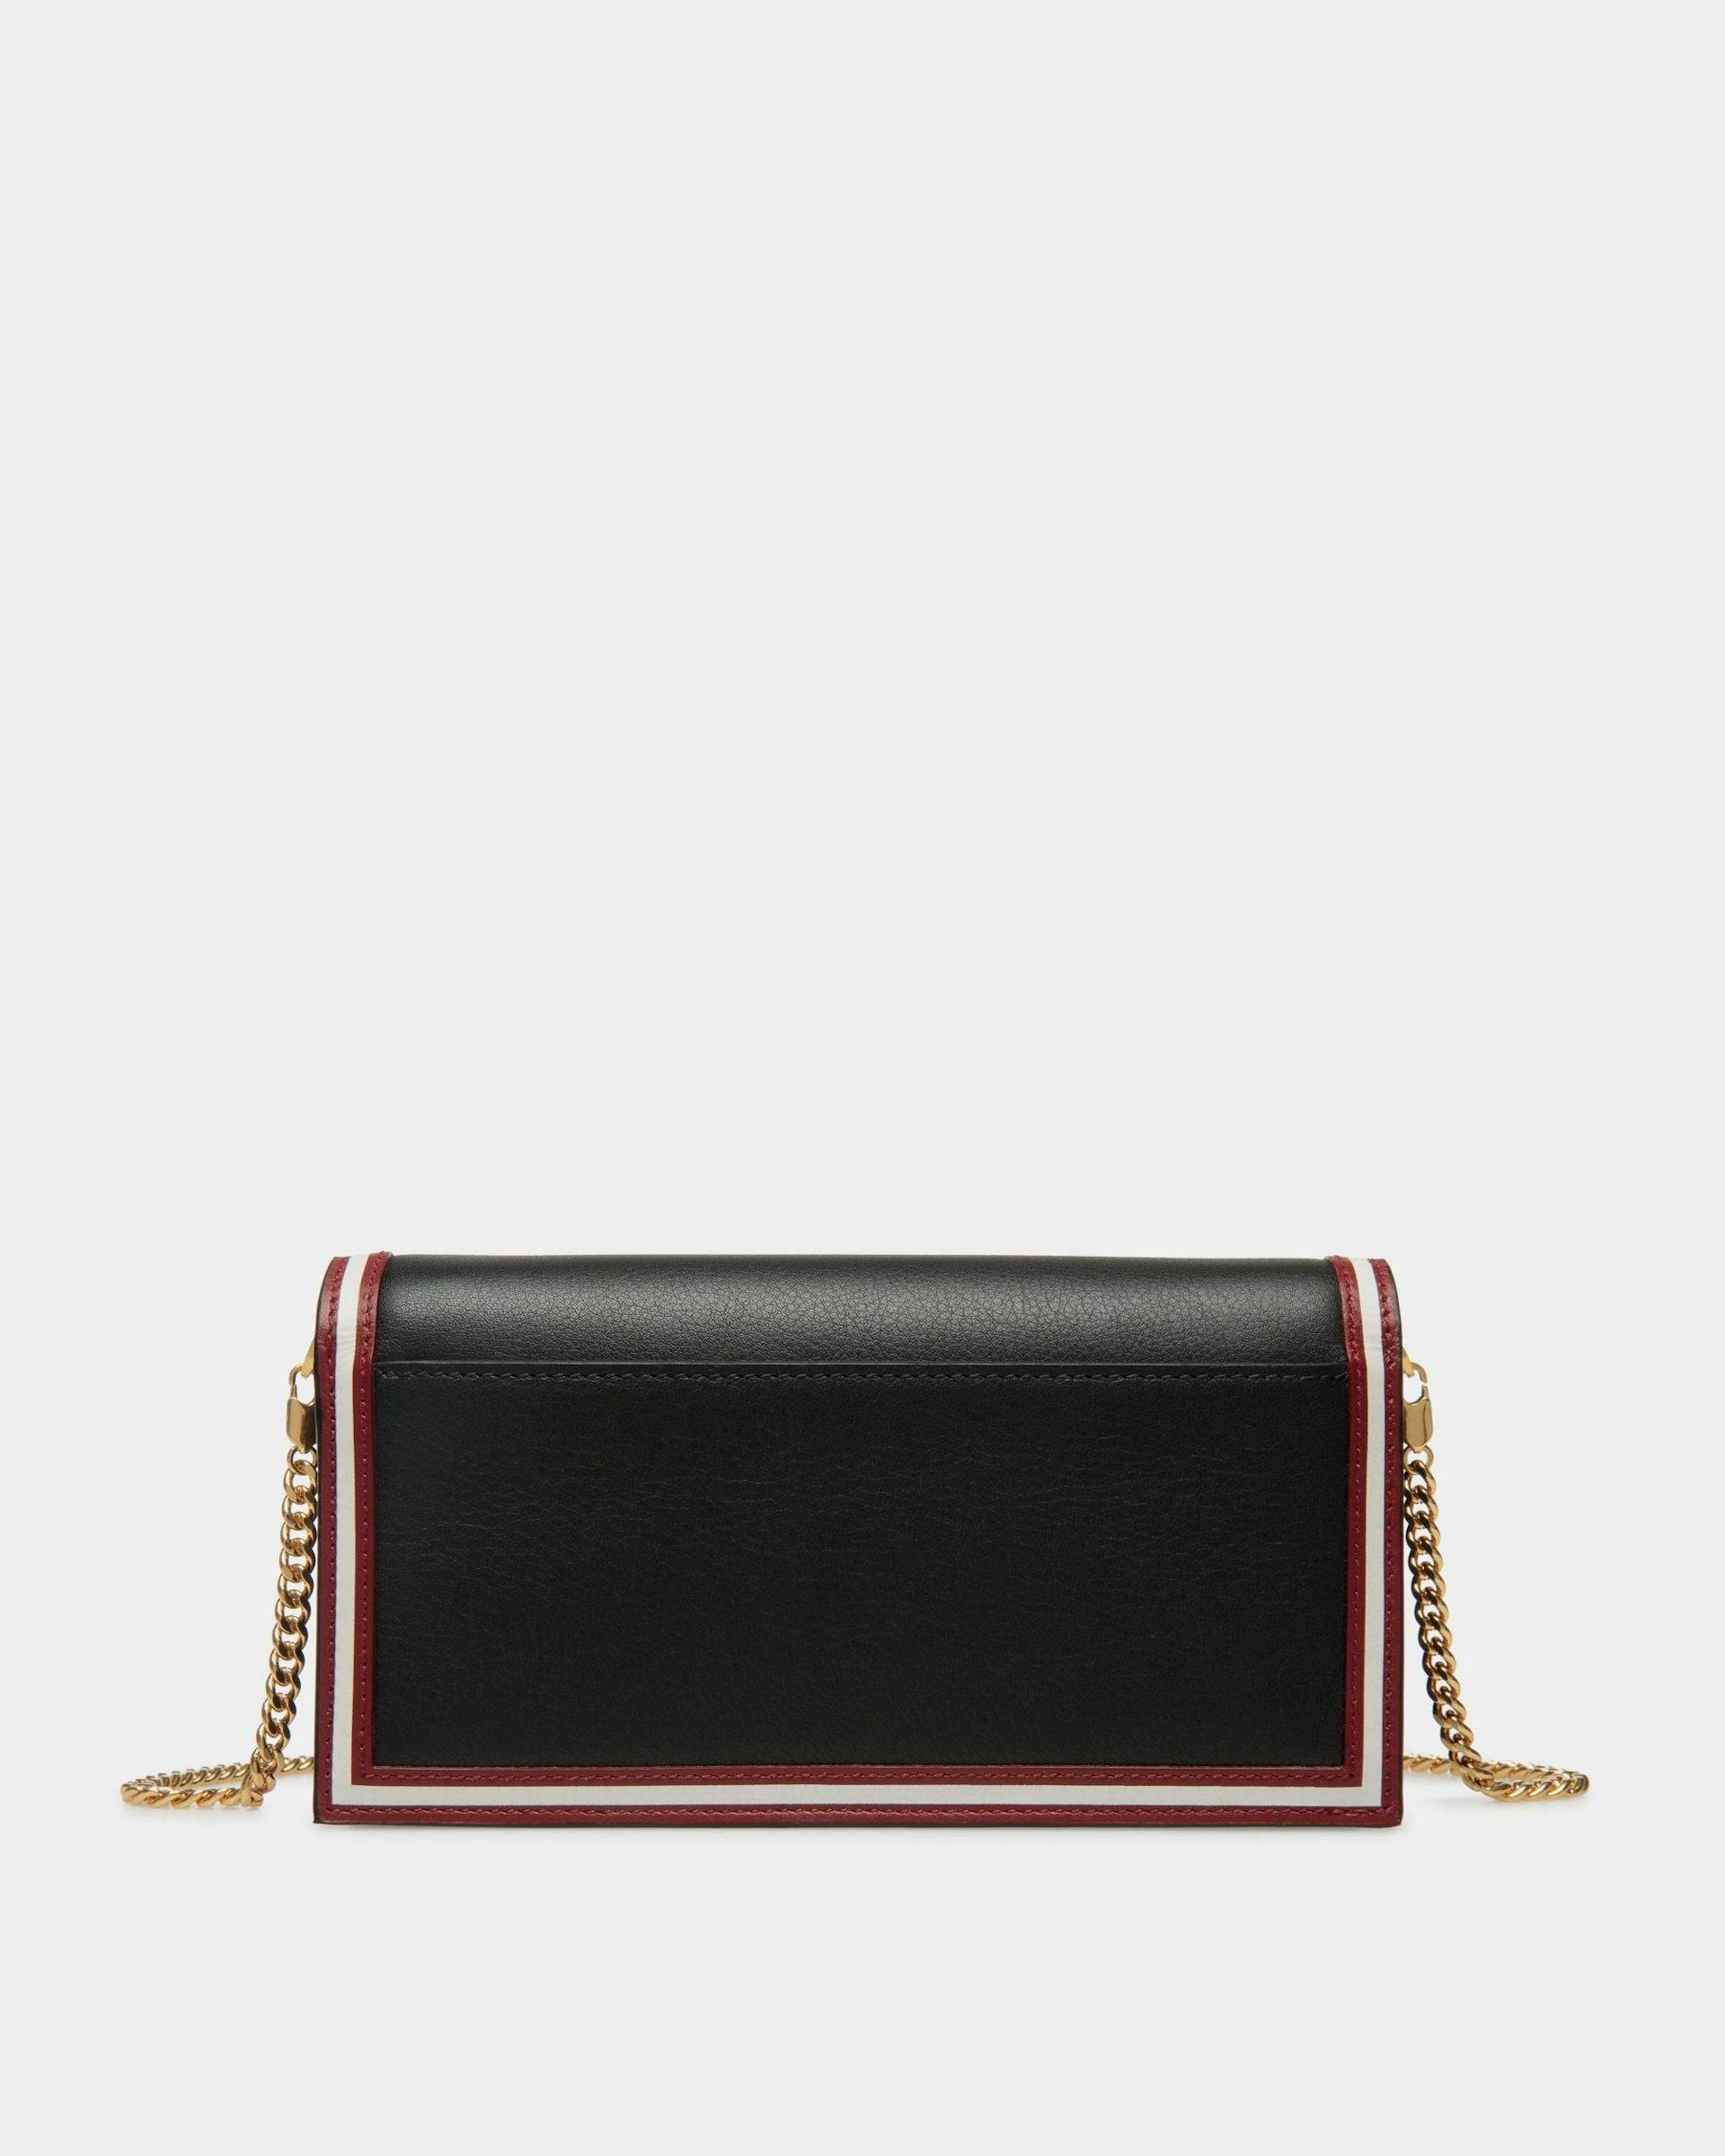 Women's Code Wallet on a Chain in Black Leather | Bally | Still Life Back